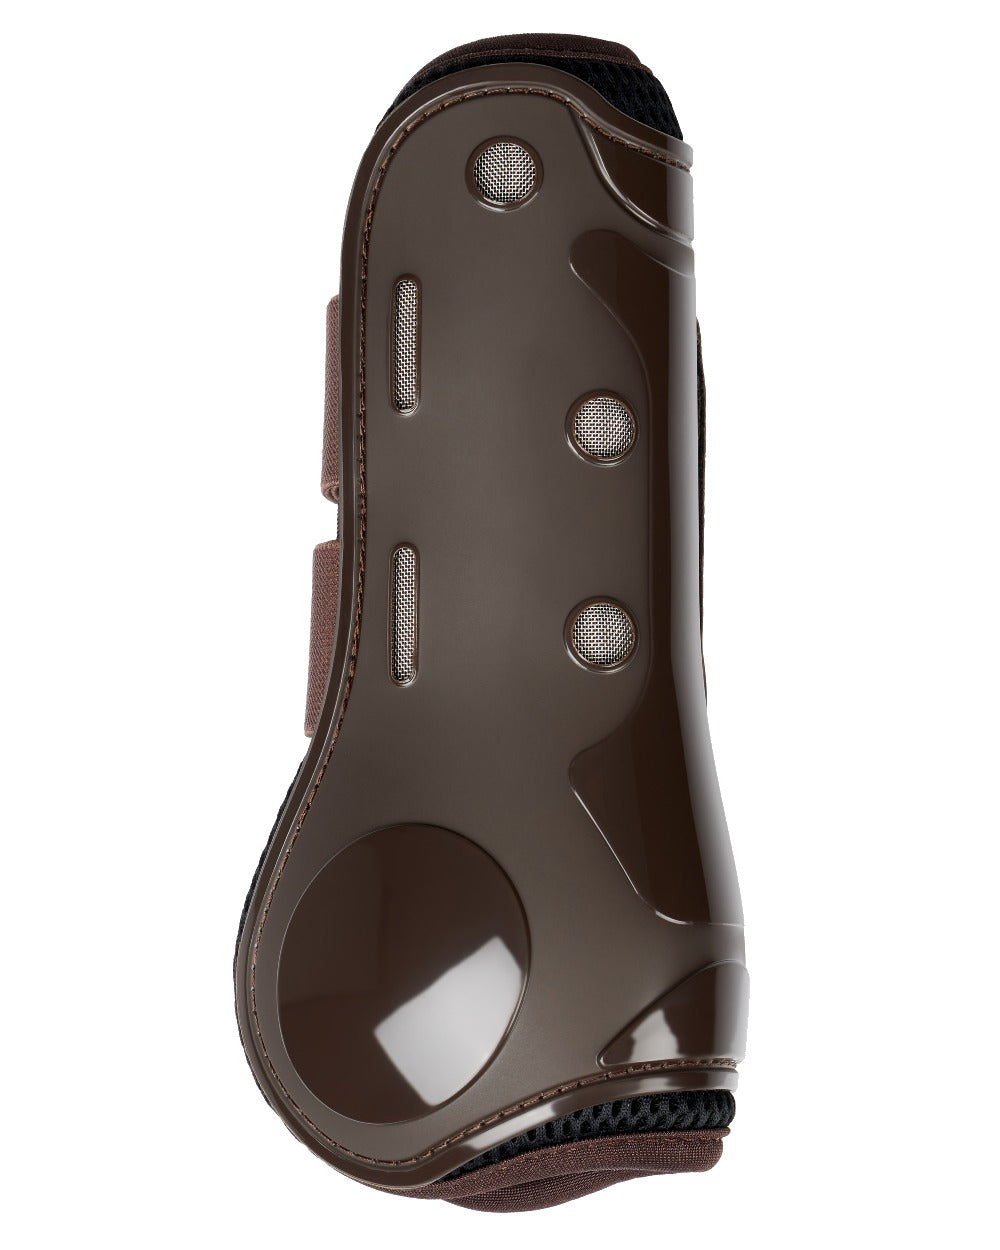 Brown coloured LeMieux Derby ProJump Tendon Boots on white background 